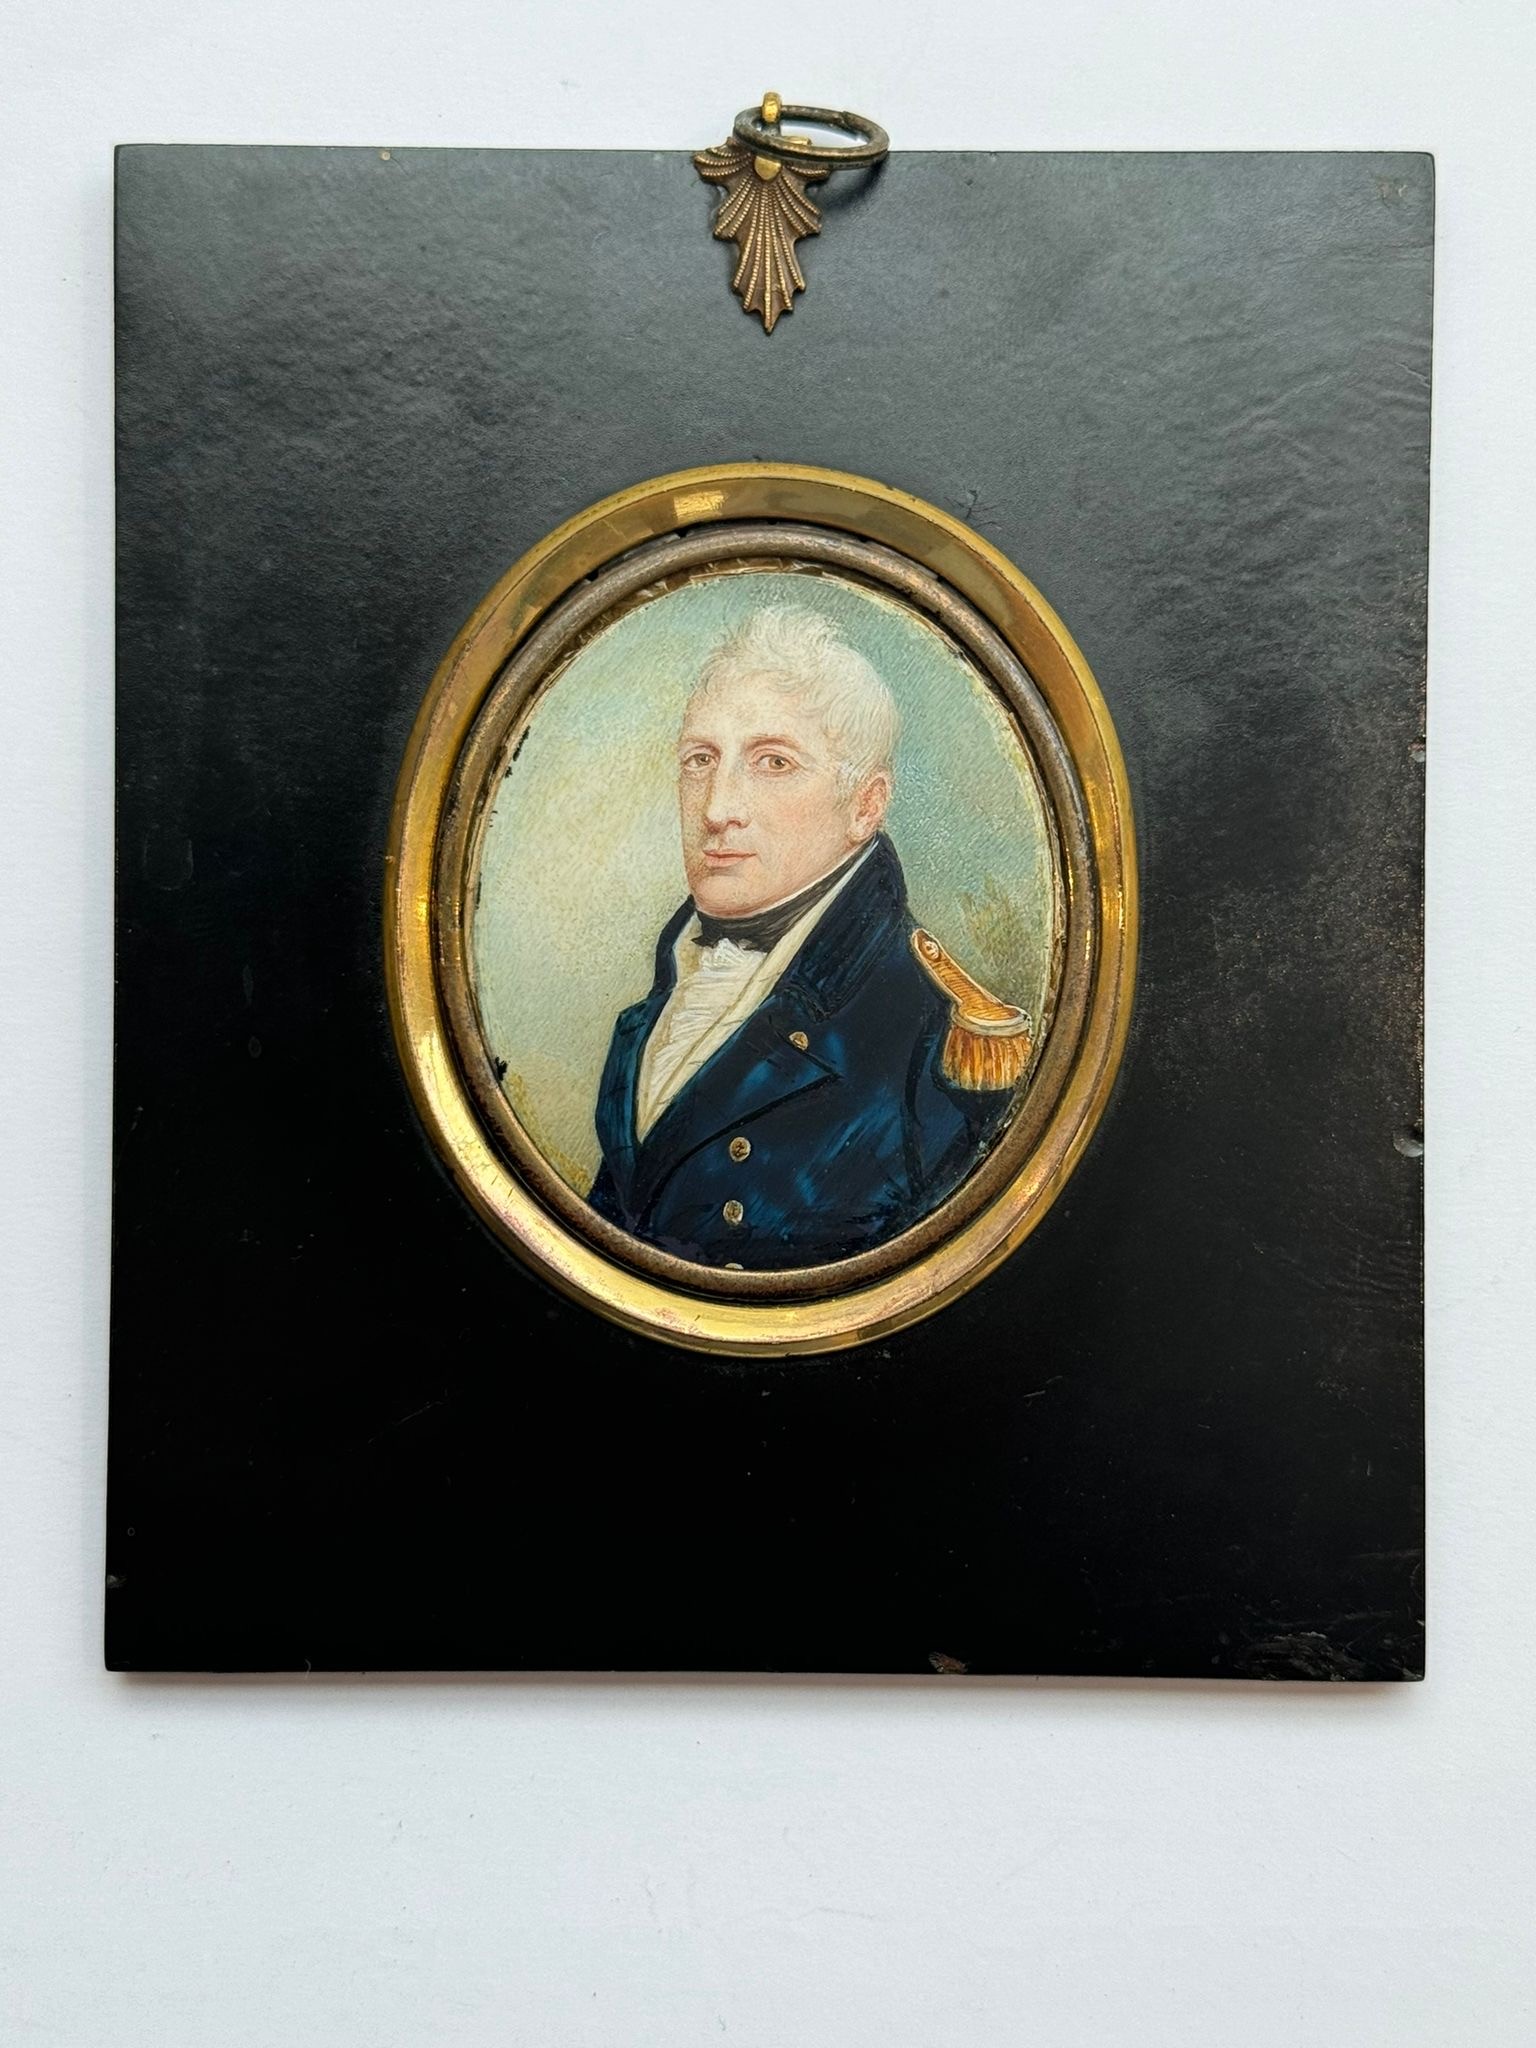 An early 19th century oval portrait miniature of a middle-aged Naval officer, with quiffed grey